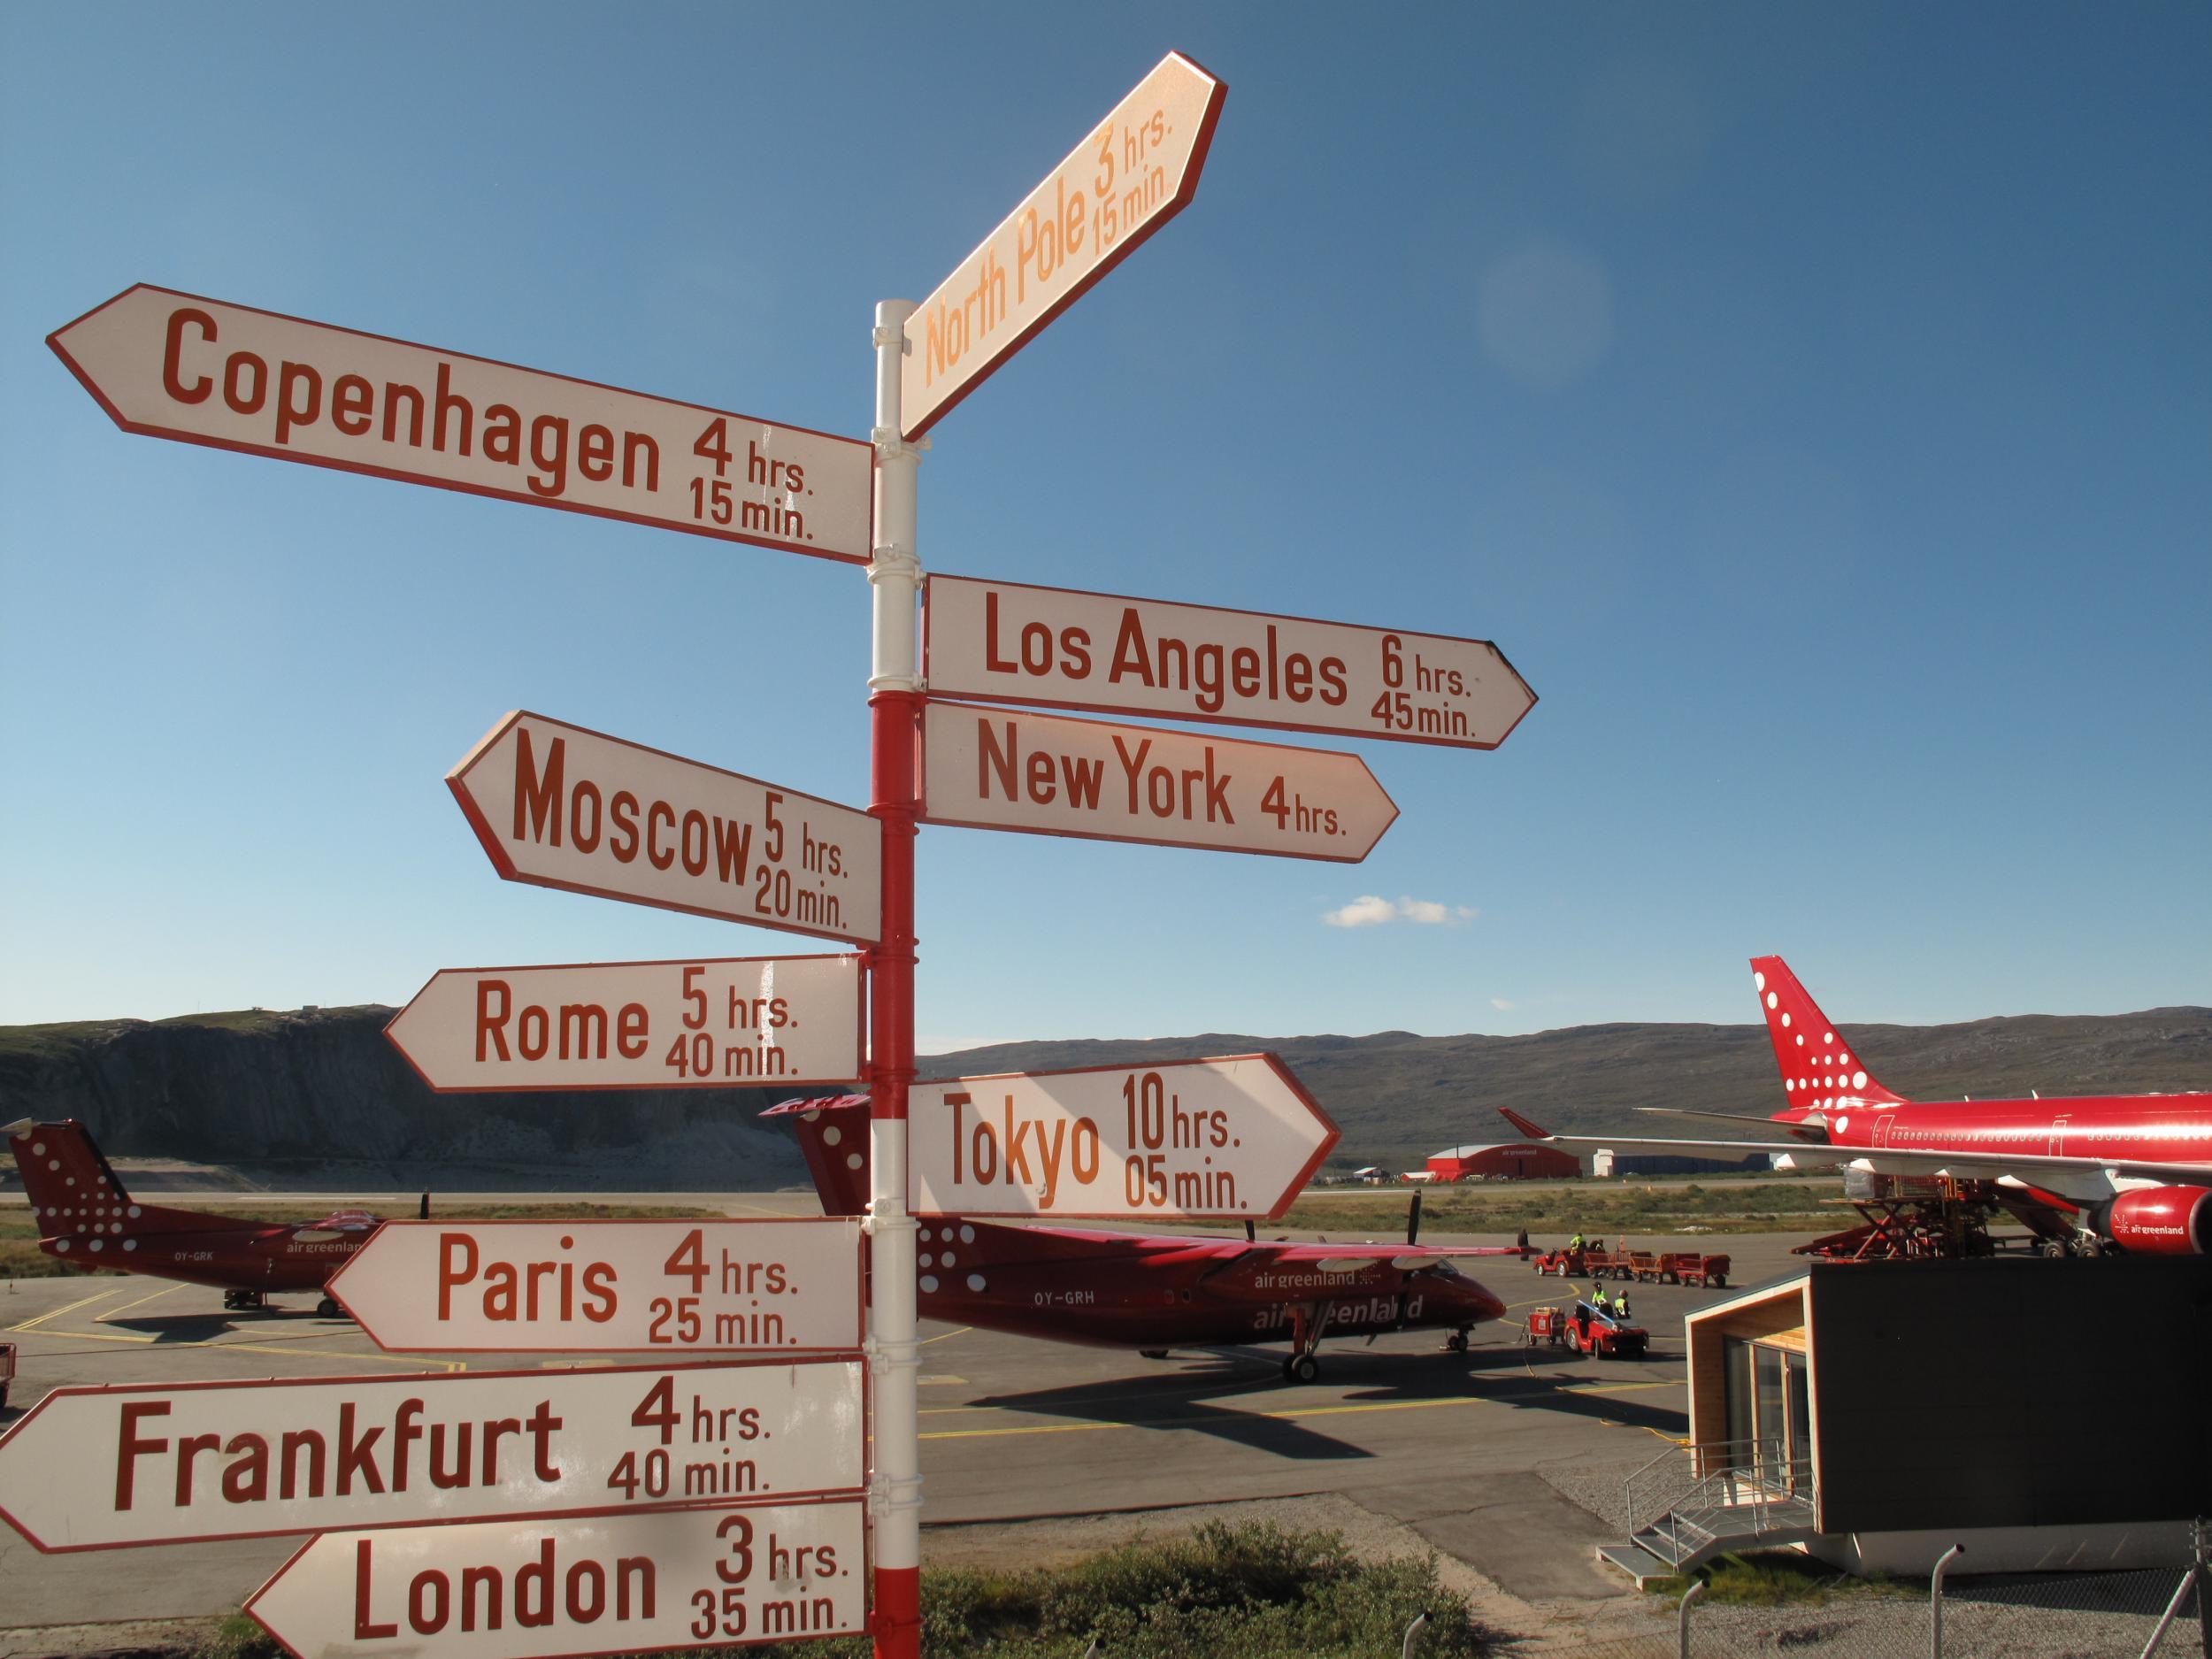 Greenland could make a great trans-Atlantic stopover